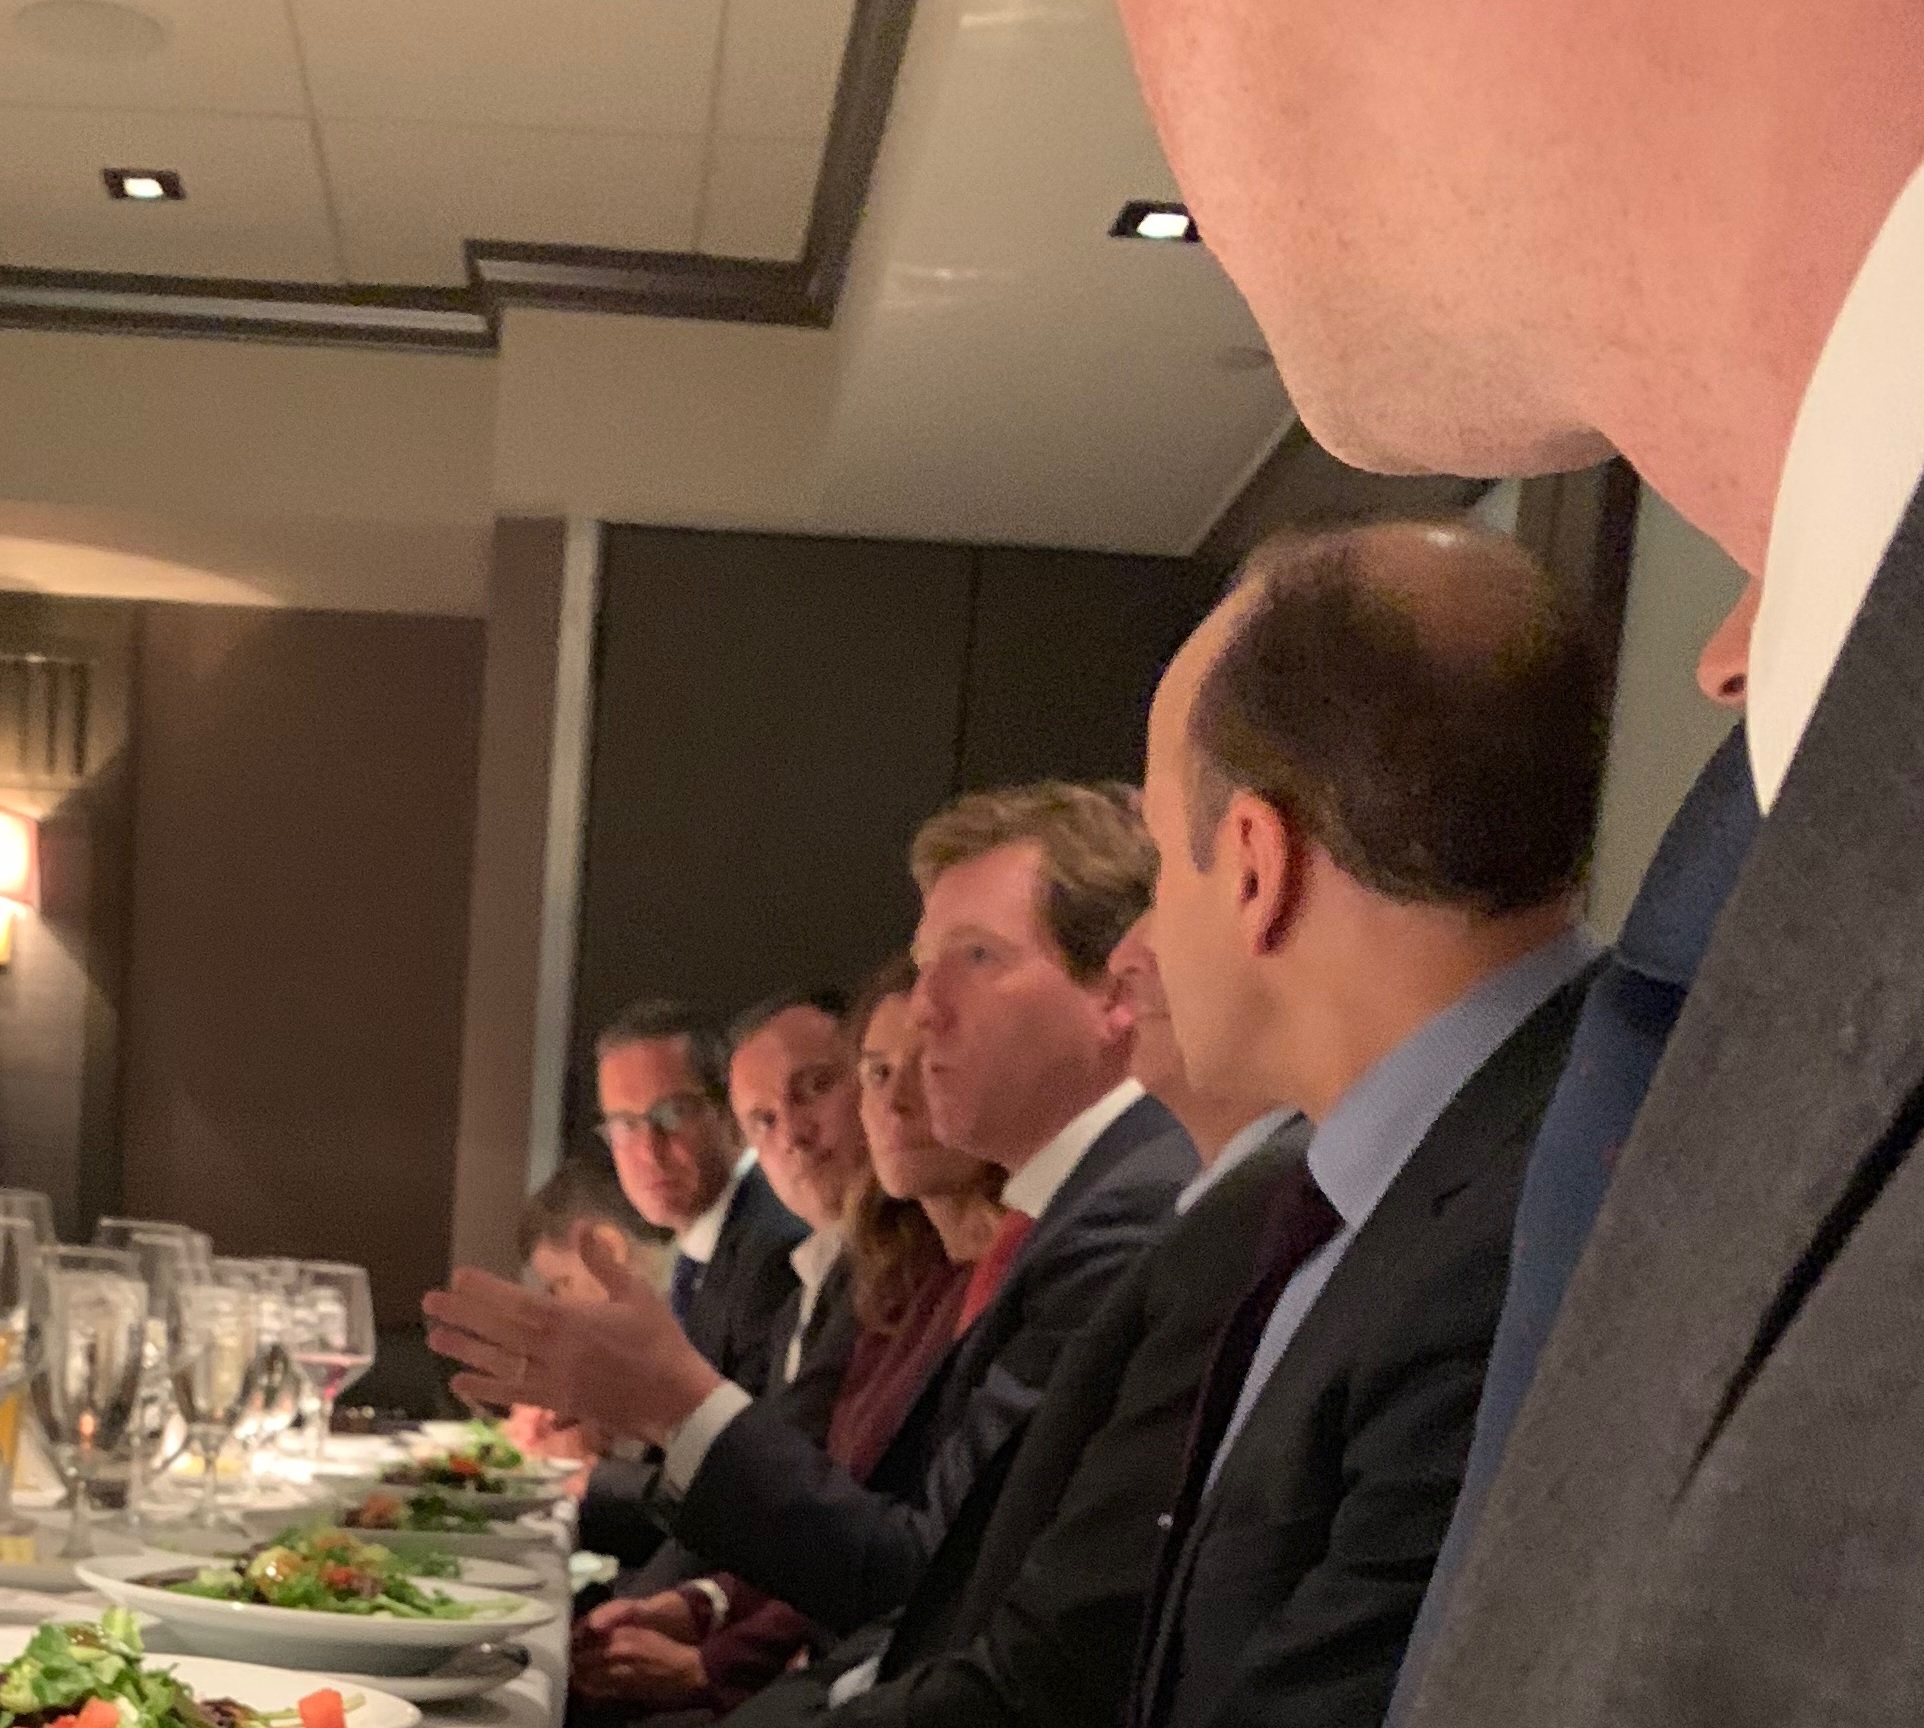 Chris Krebs,Director of the Department of Homeland Security’s Cybersecurity and Infrastructure Security Agency (CISA) meets with the ISA Board of Directors during October 2019 Salon Dinner;